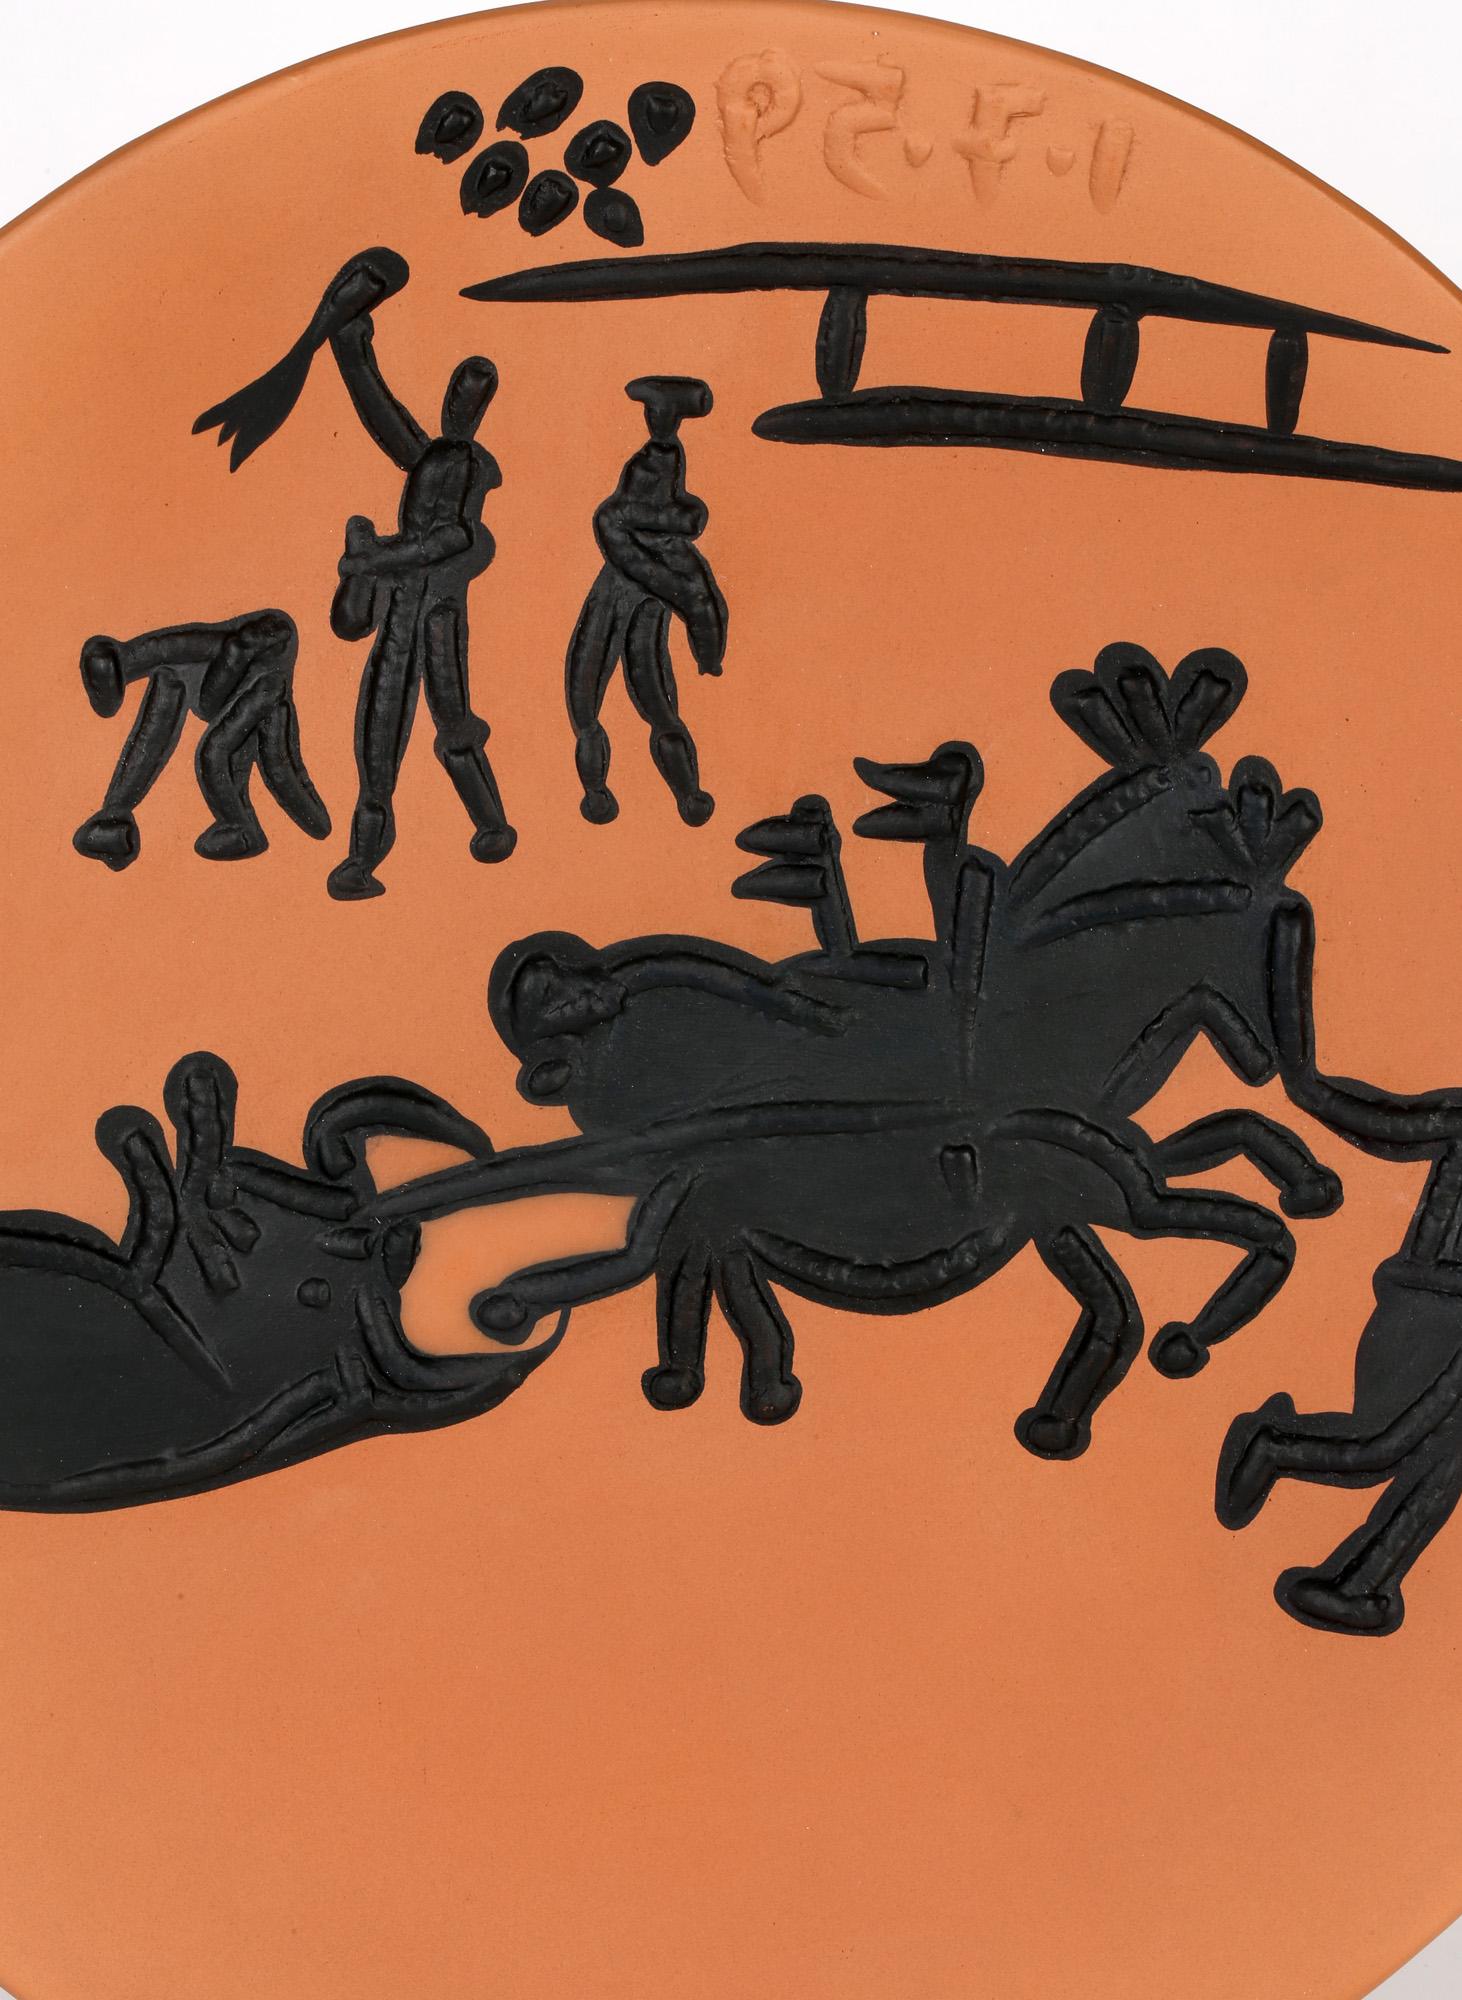 A stylish Arrastro (A.R. 431) terre de faience limited edition dish from a bull fight series and portraying the bull being towed from the arena by dress horses by Pablo Picasso and dated 1st July 1959. The rounded dish is potted in terracotta